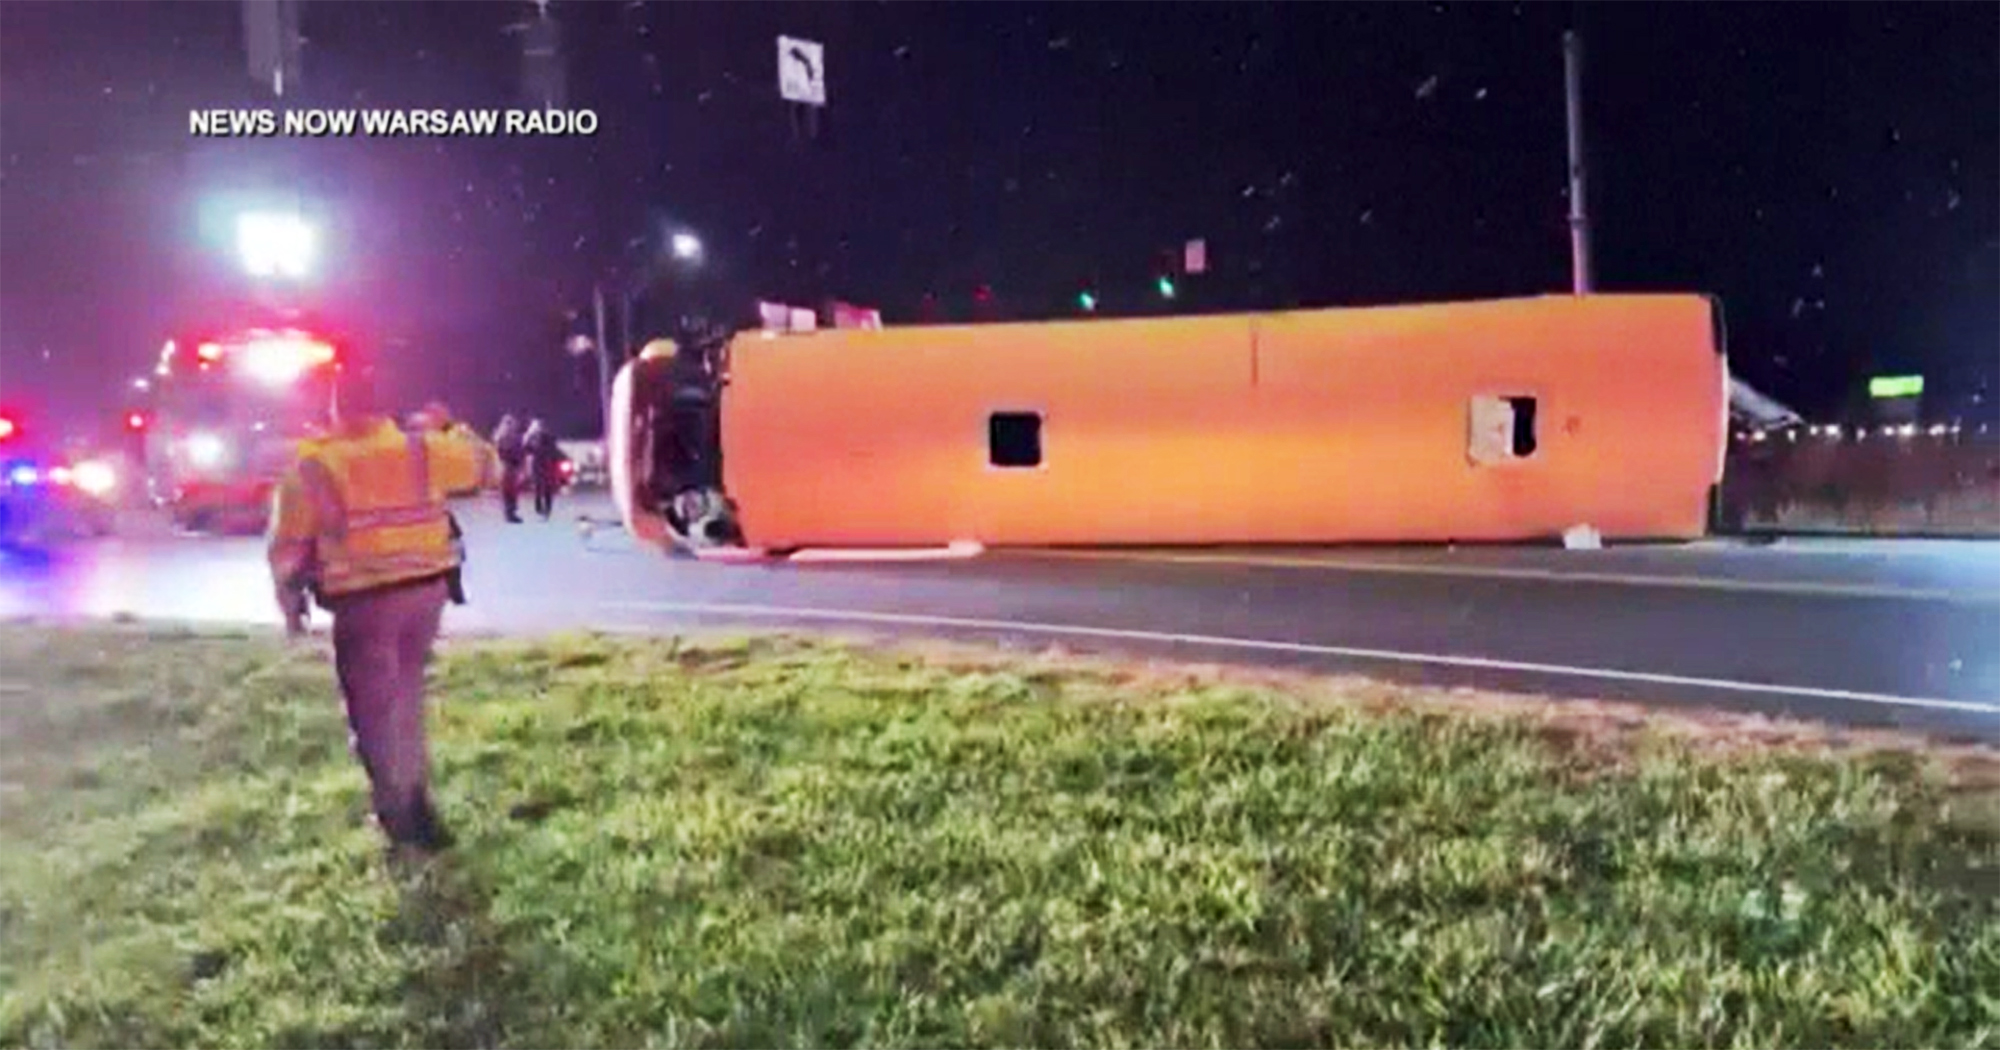 PHOTO: First responders investigate the scene of a overturned school bus in Warsaw, Ind., Nov. 12, 2022.